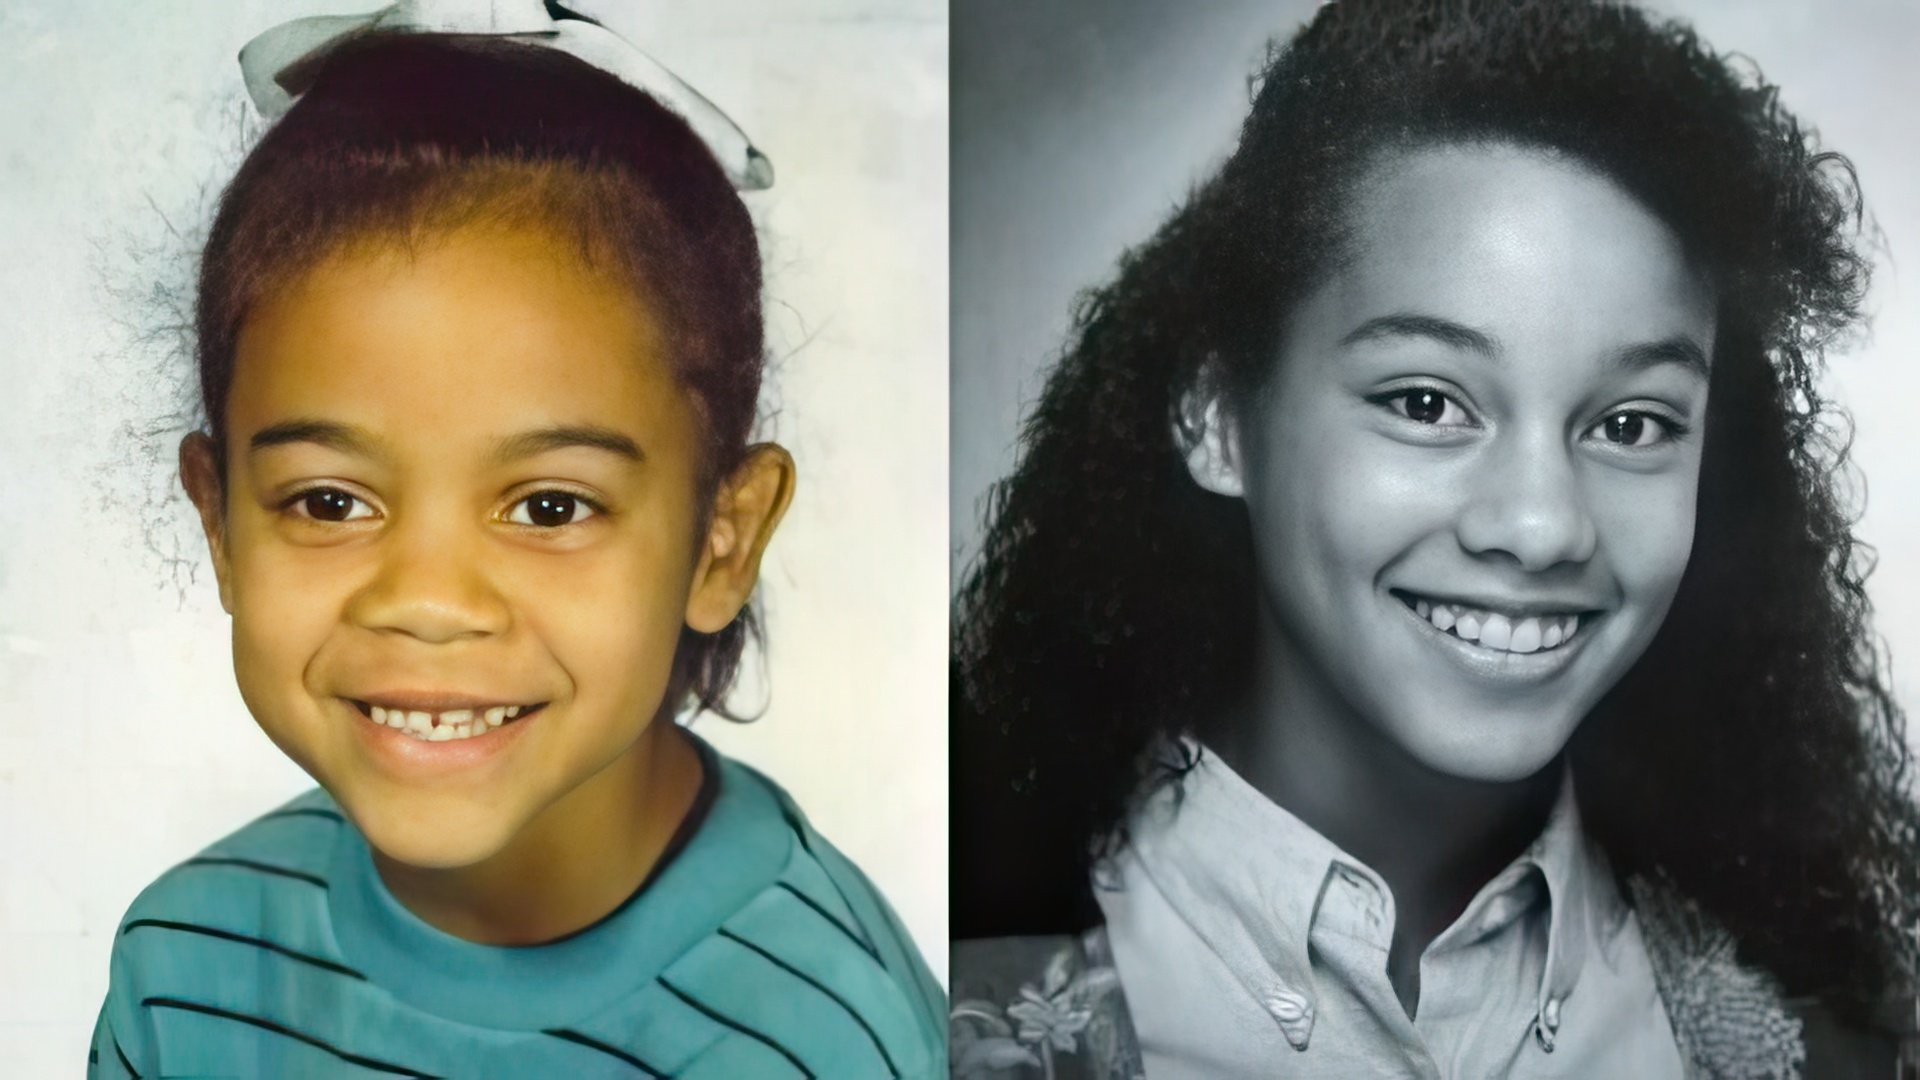 The actress Zoe Saldana in her childhood and adolescence